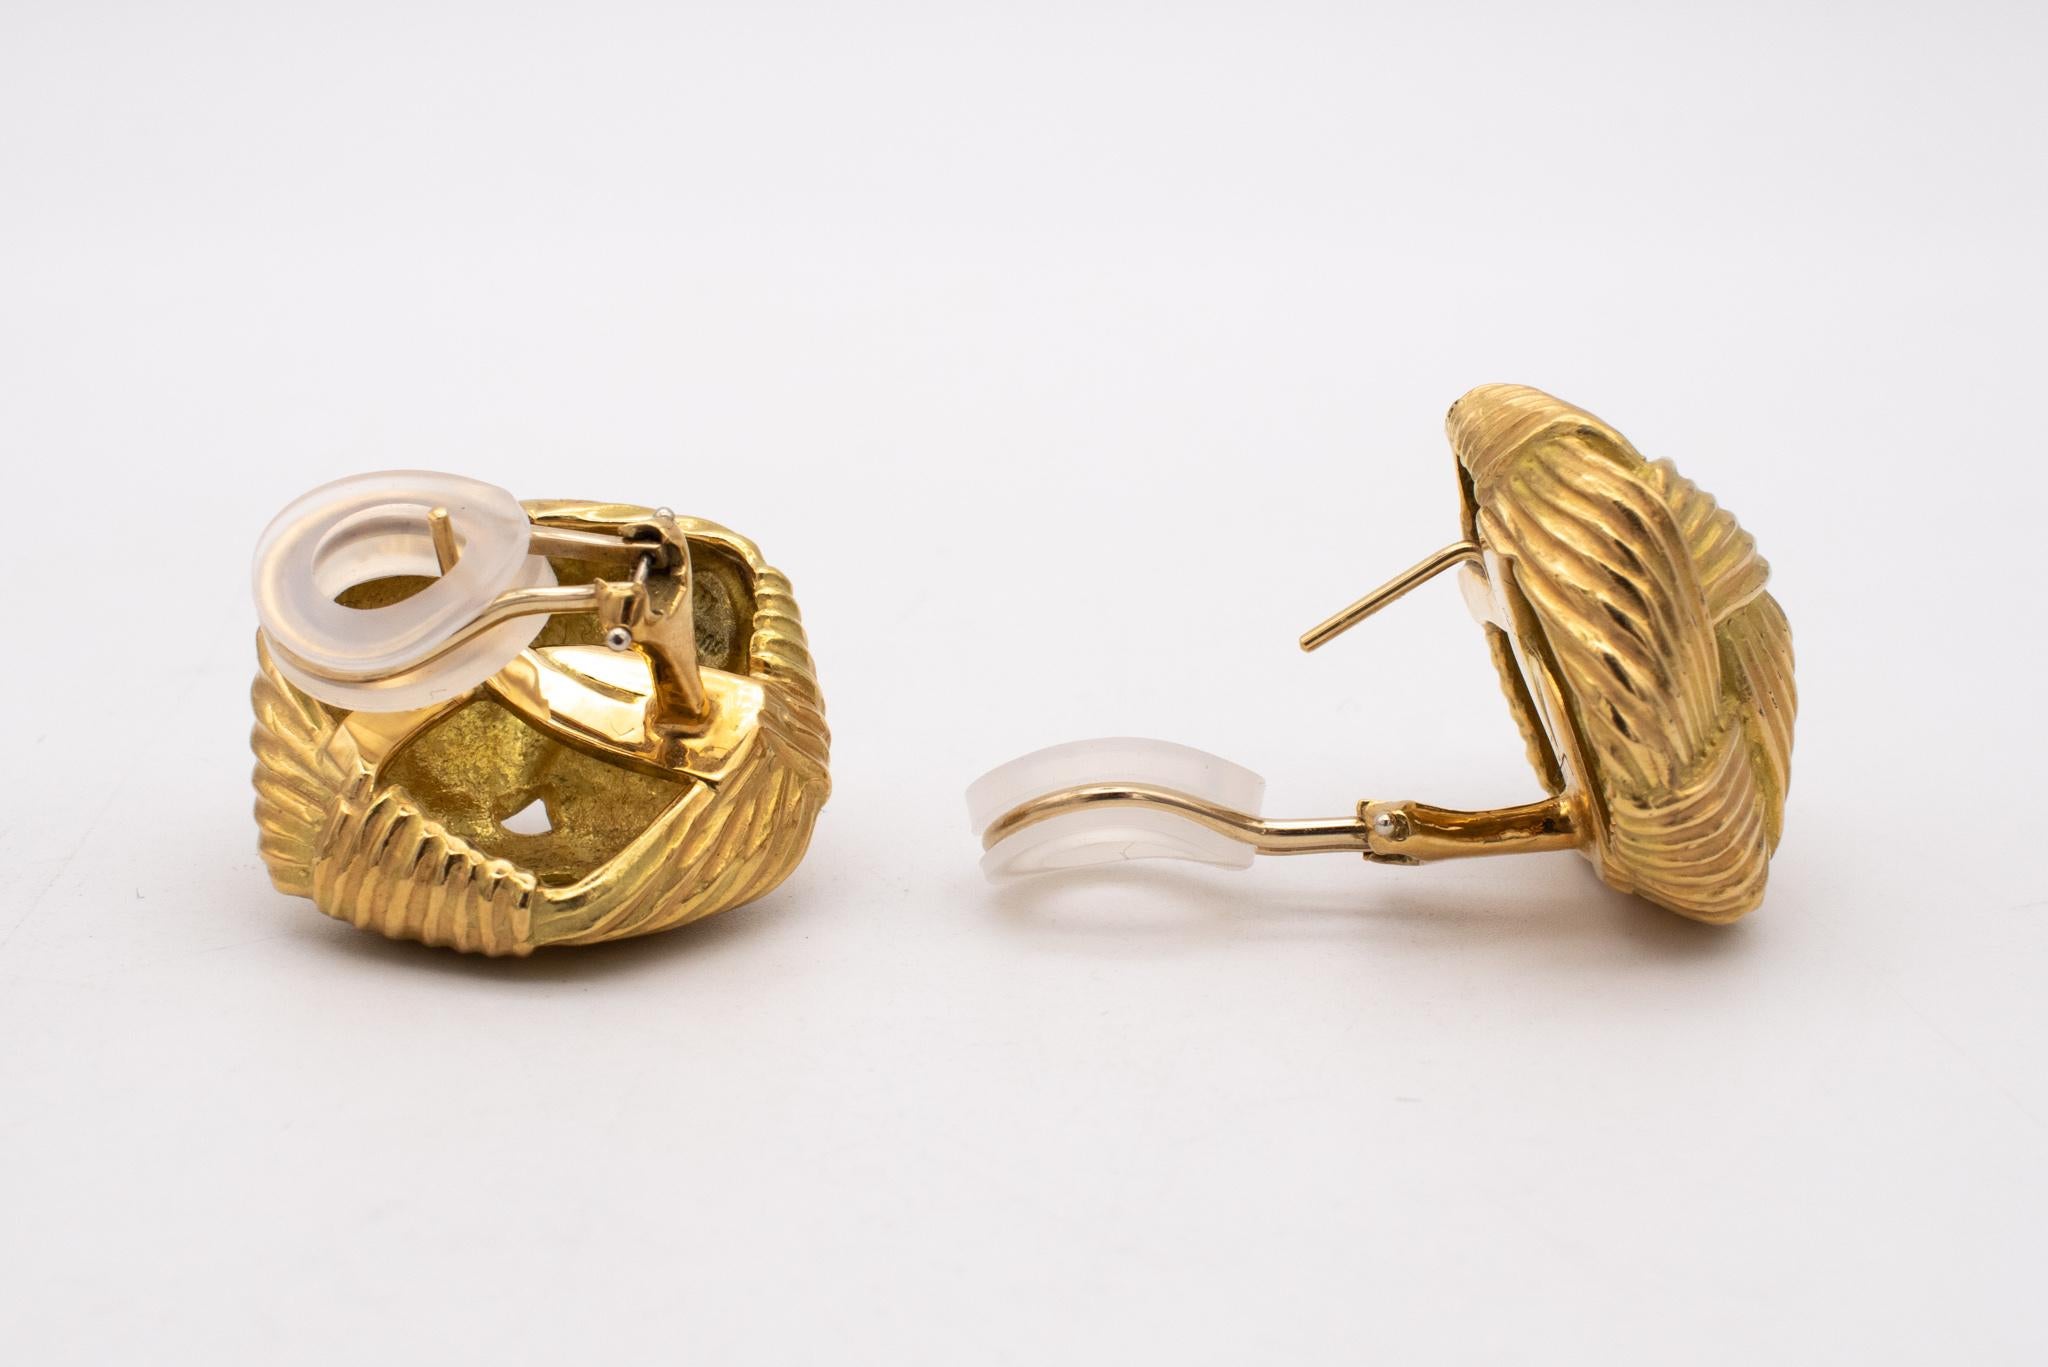 Women's Angela Cummings 1984 Studio Textured Wrapped Earrings in Solid 18Kt Yellow Gold For Sale